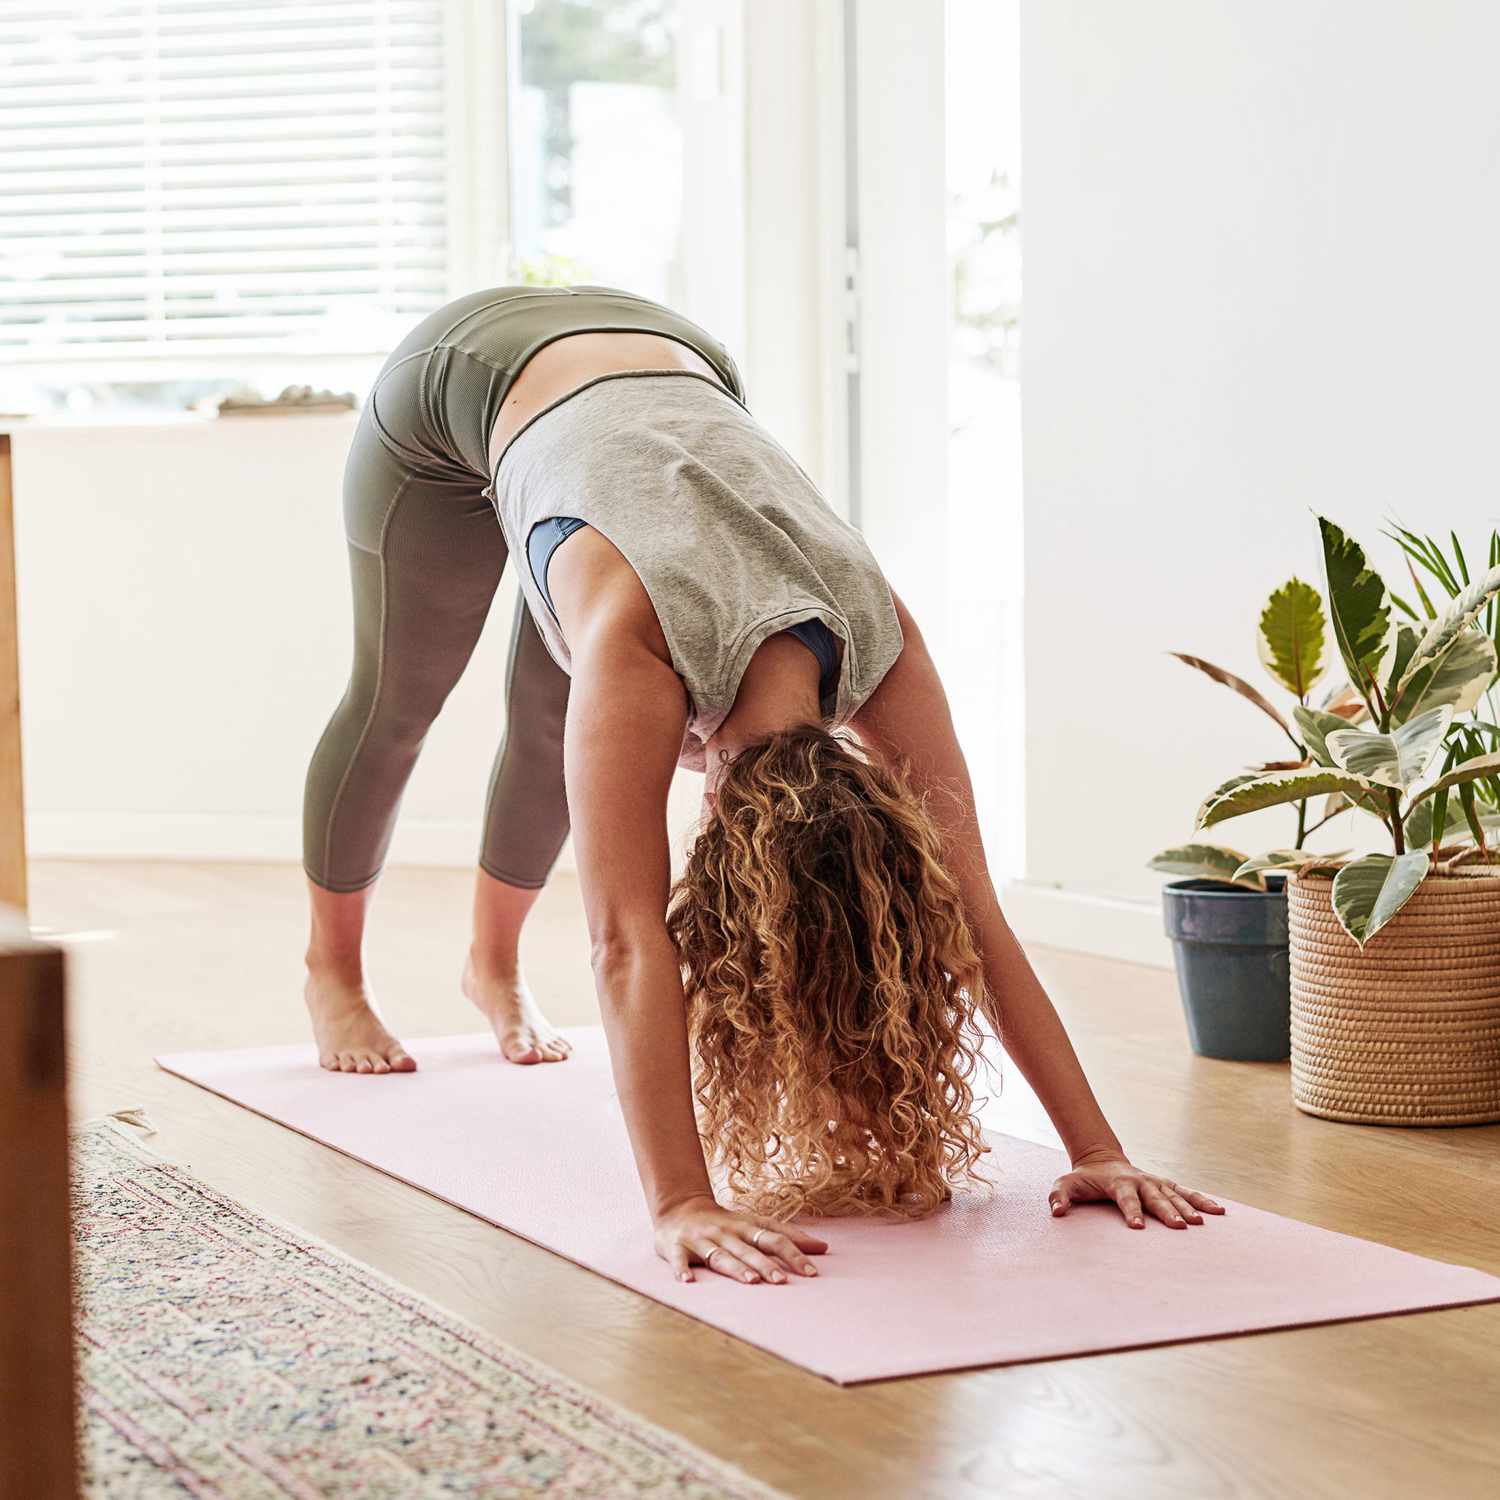 Woman in Downward Dog Stretch Position